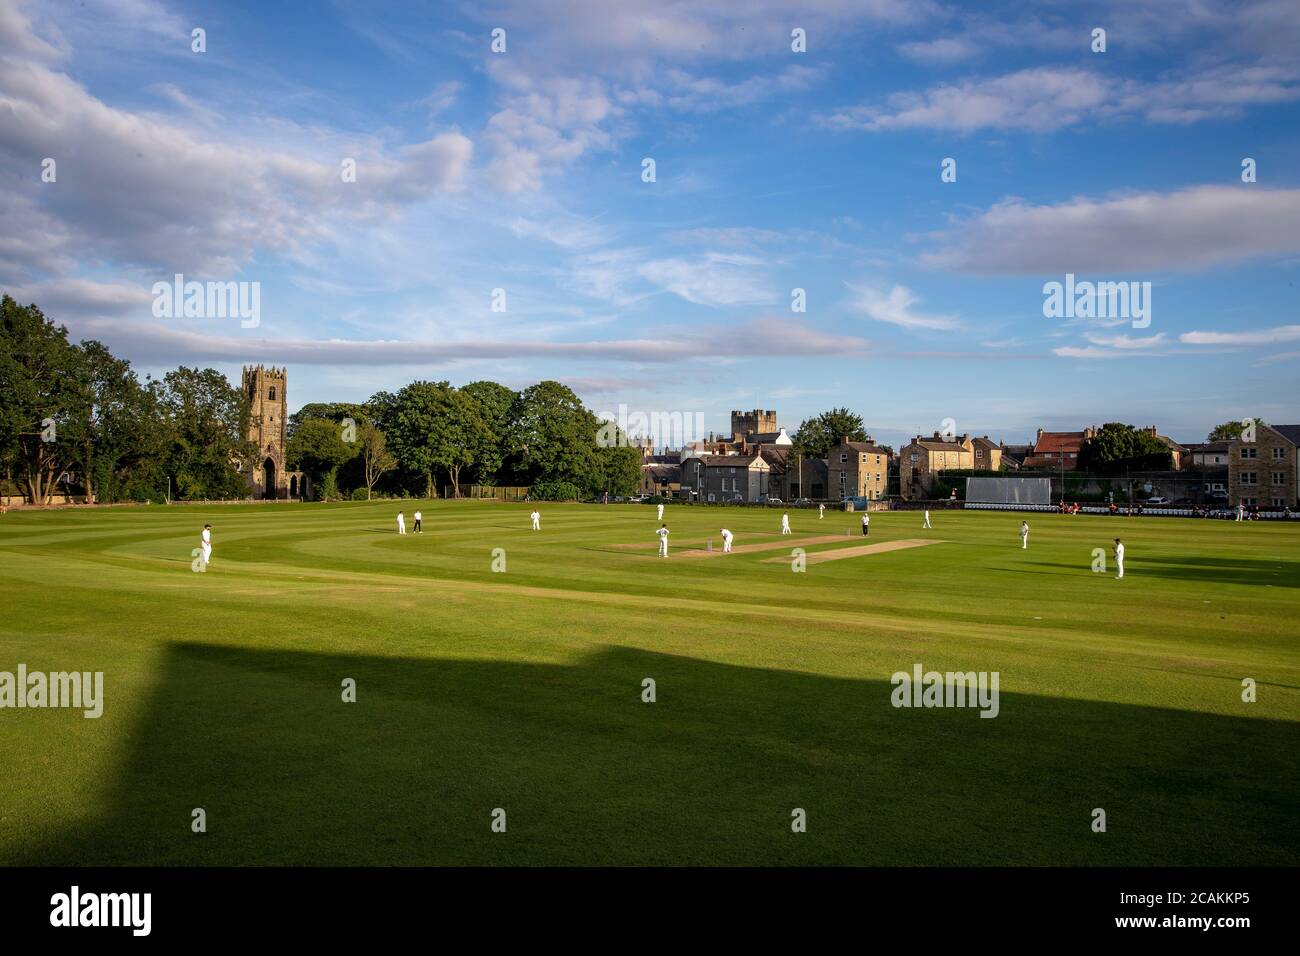 RICHMOND, ENGLAND, AUGUST 6TH 2020 - A general view of the Hurgill Road ground home of Richmondshire Cricket Club with Richmond Castle in the backgrou Stock Photo